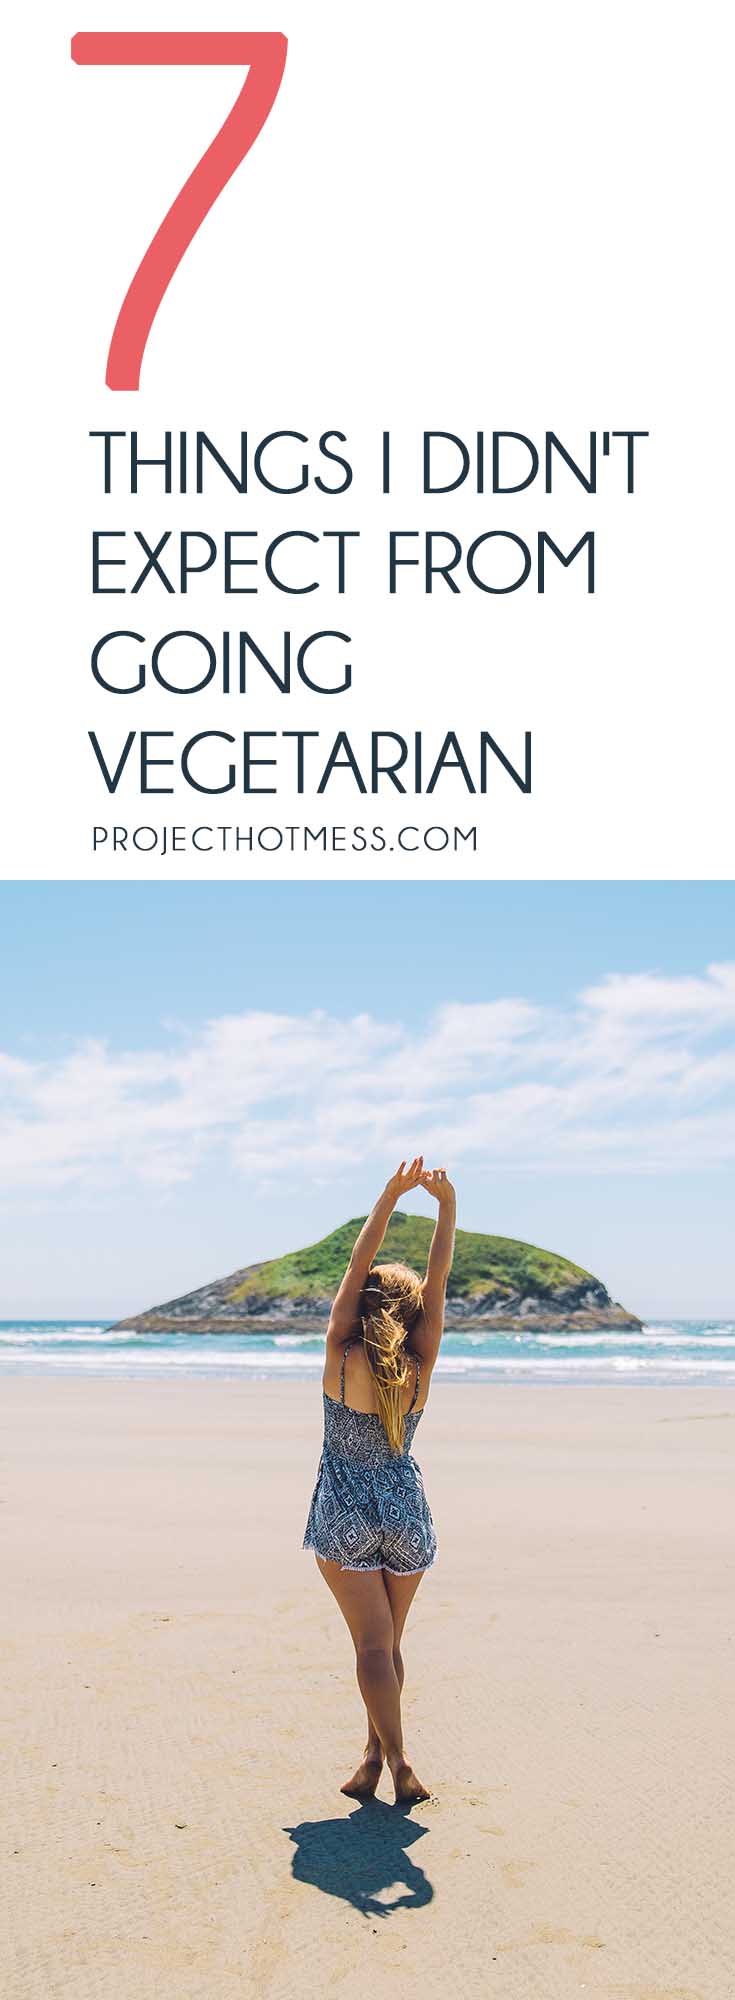 One of the biggest life changes you can make is around your health and diet, and going vegetarian is no exception. Here are some surprises from the change. Vegetarian | Eating Healthy | Vegetarian Diet | Vegetarian Lifestyle